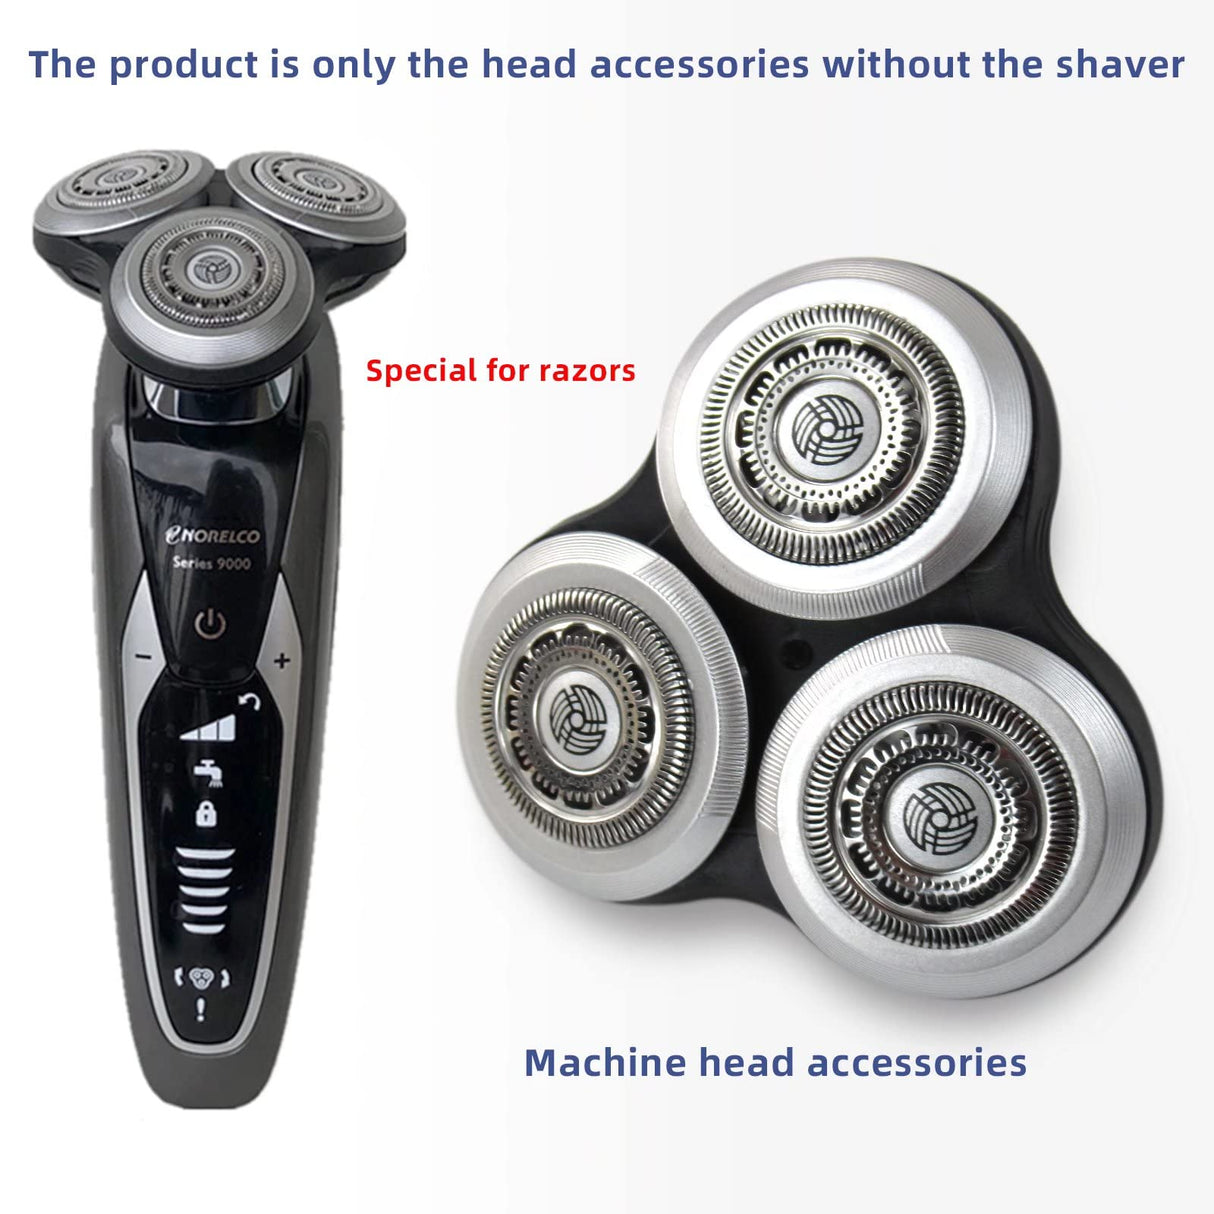 Shaving Replacement Shaver Head for Philips Norelco SH90/62 Series 9000 Series 8000 S8950 S9000 S9311 S9321 S9511 S9531 S9721